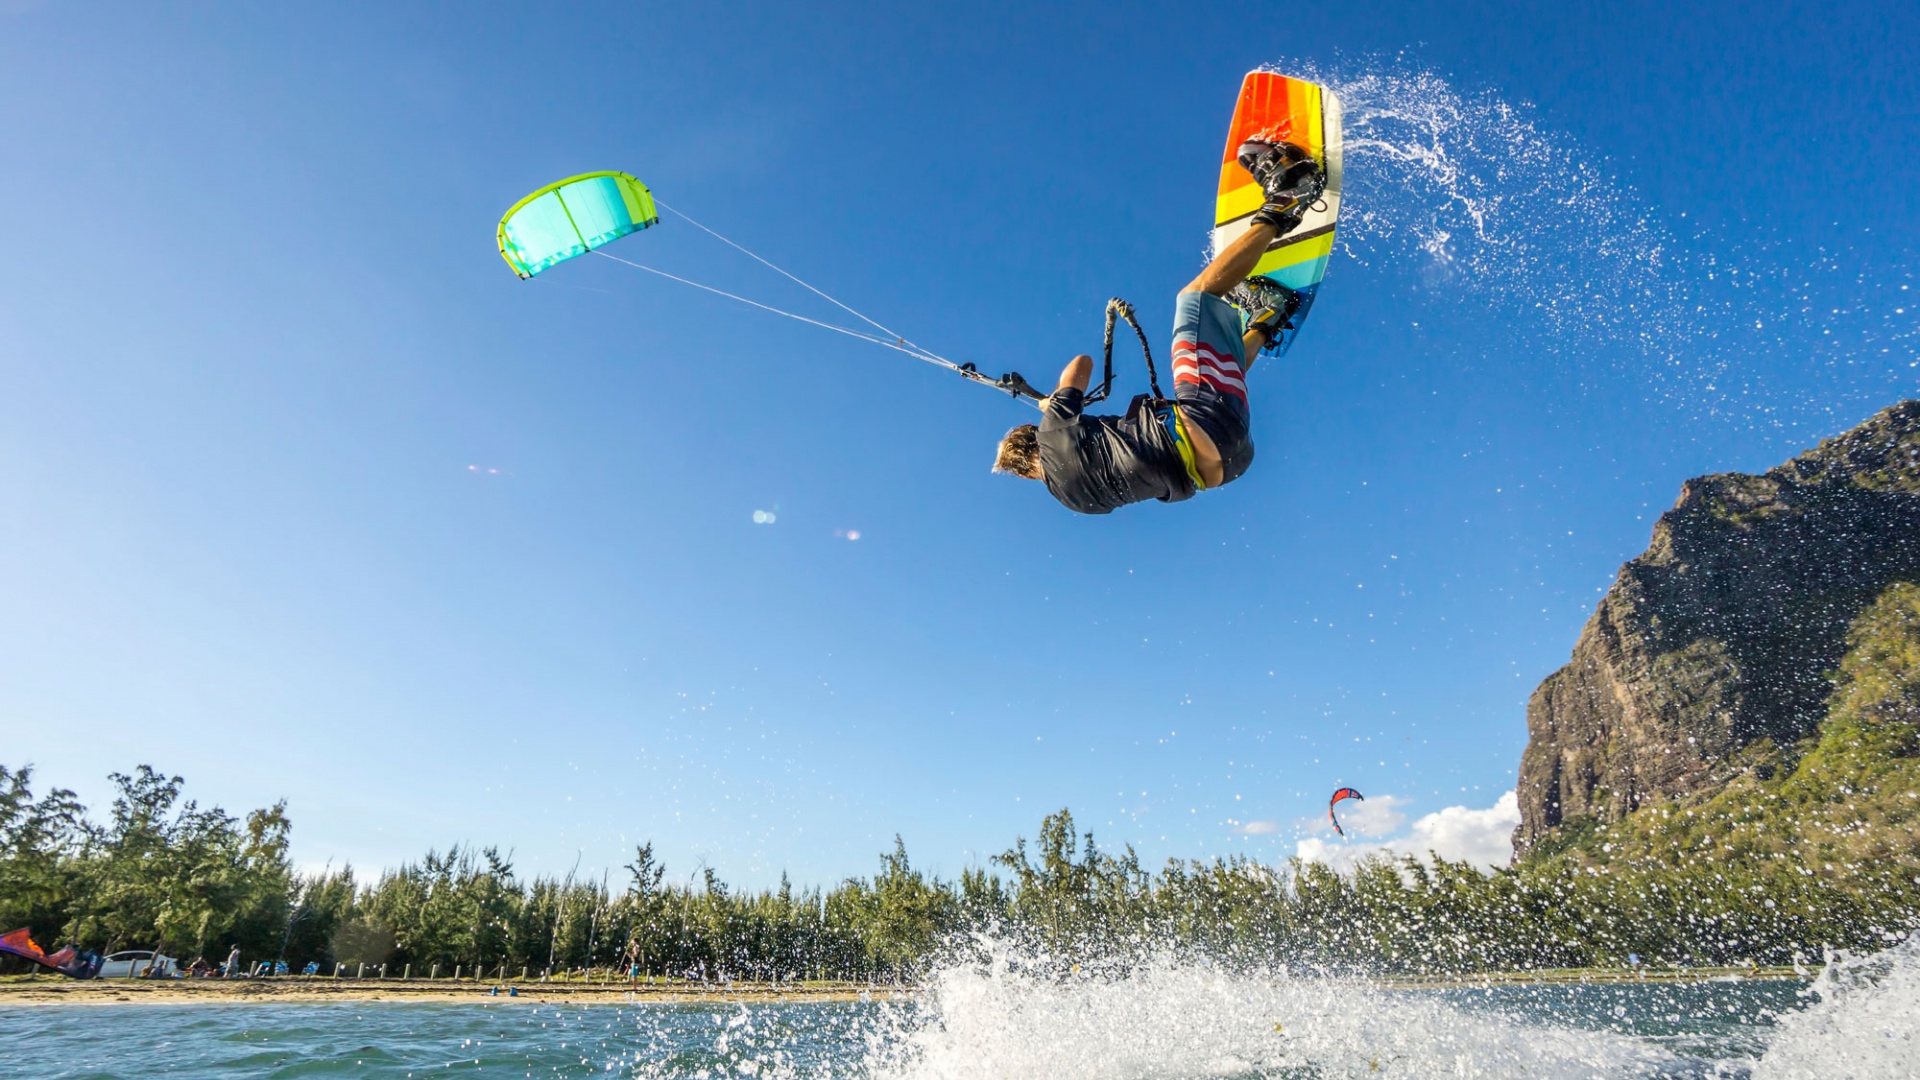 Kitesurfing For Beginners: A Guide To The Equipment | Mpora